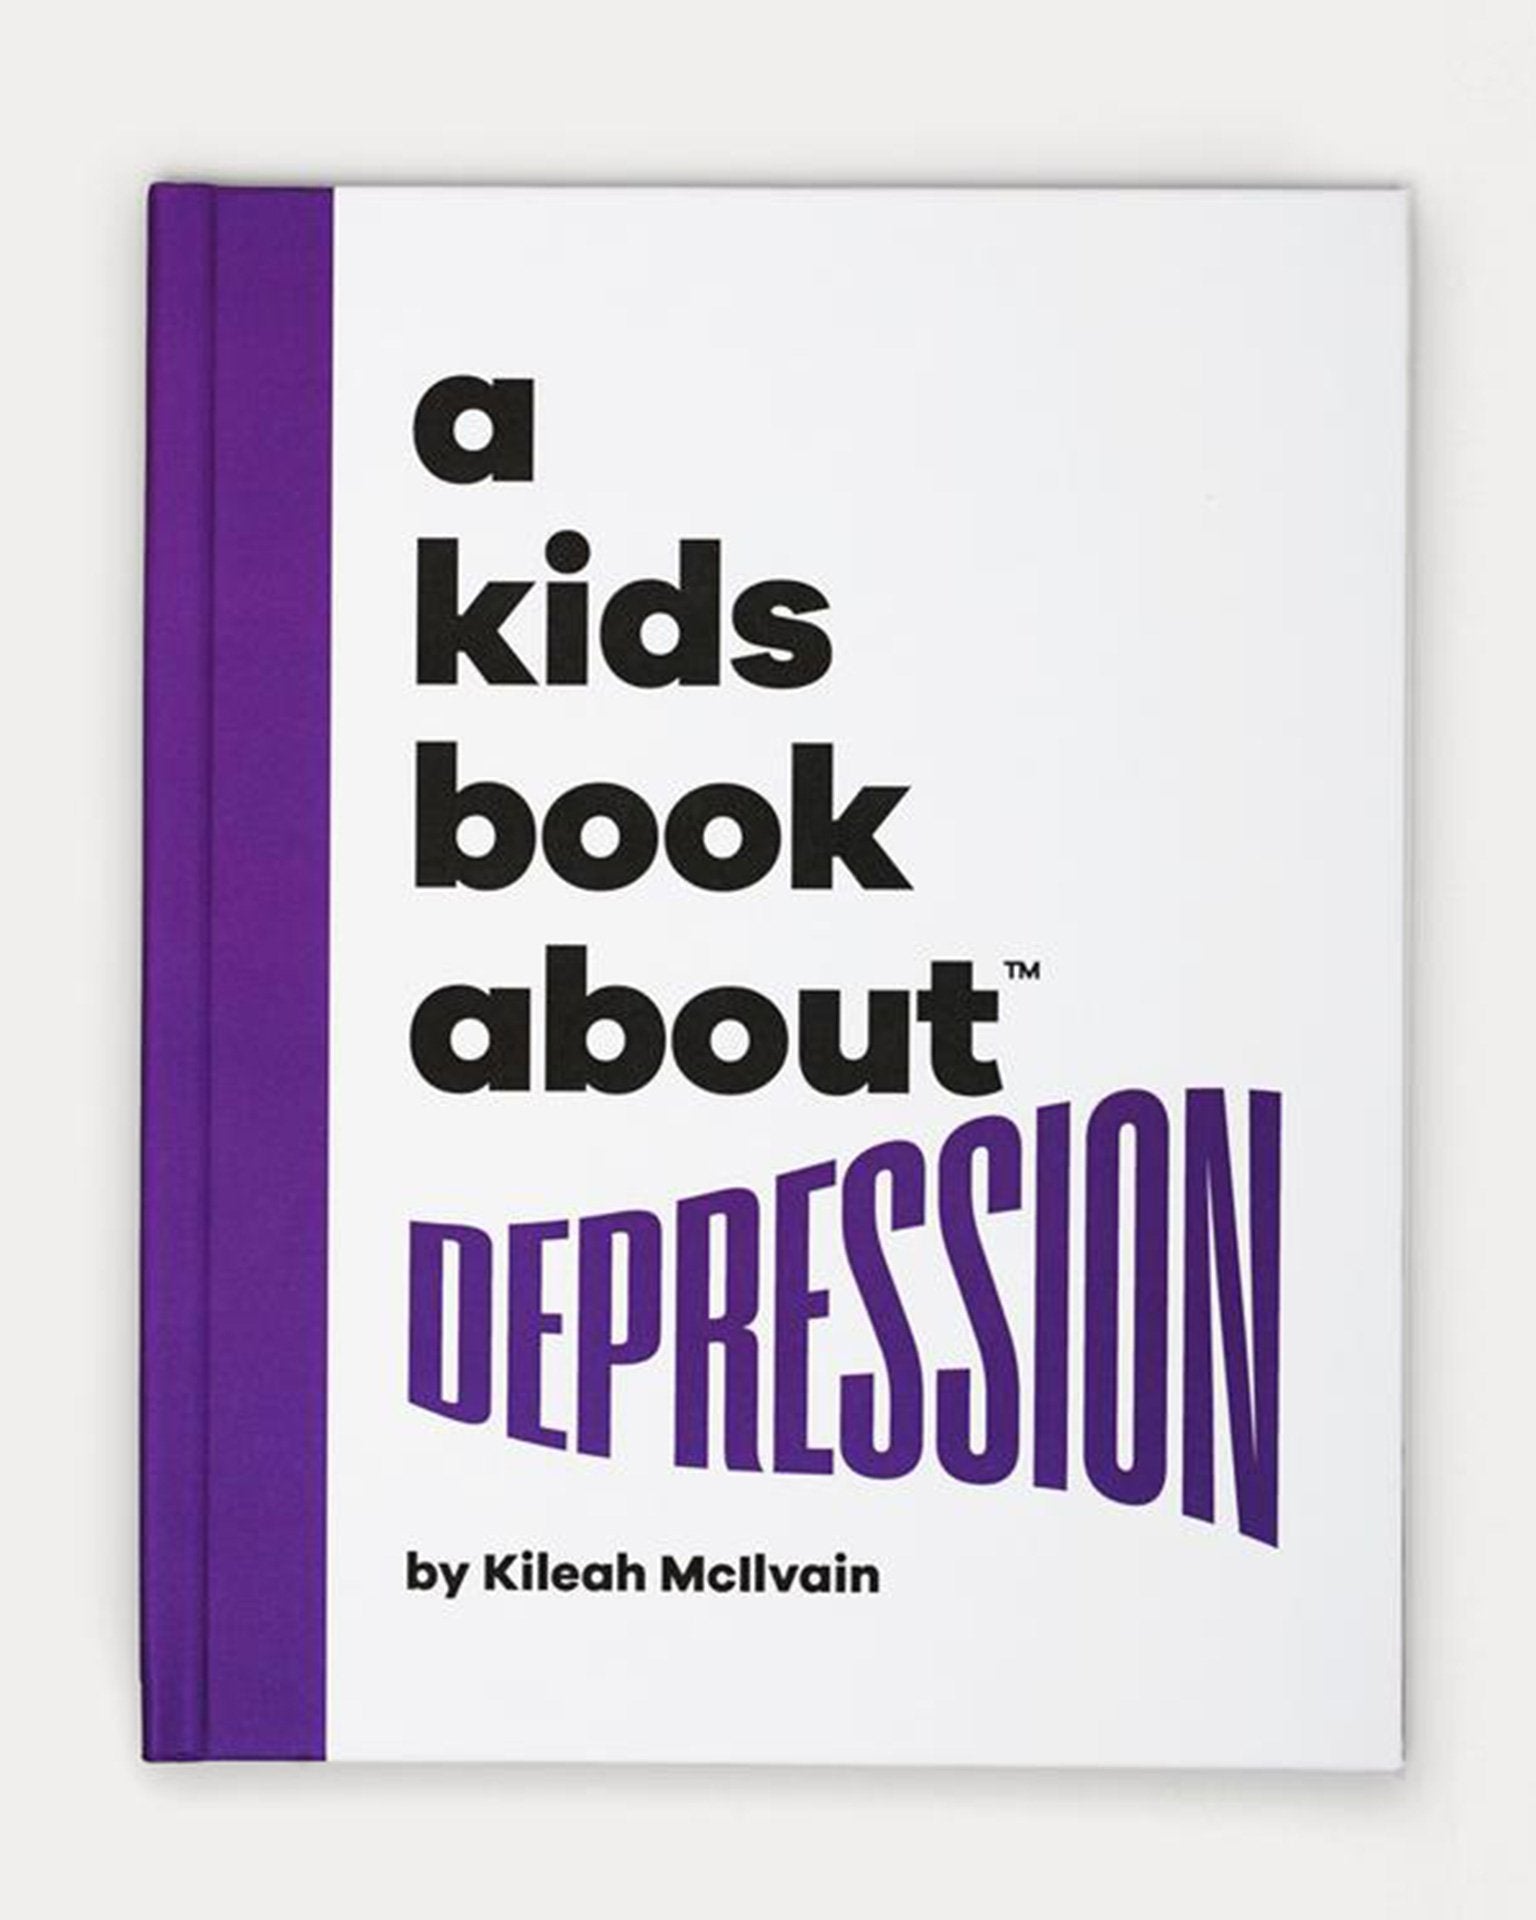 Little a kids book about play a kids book about depression